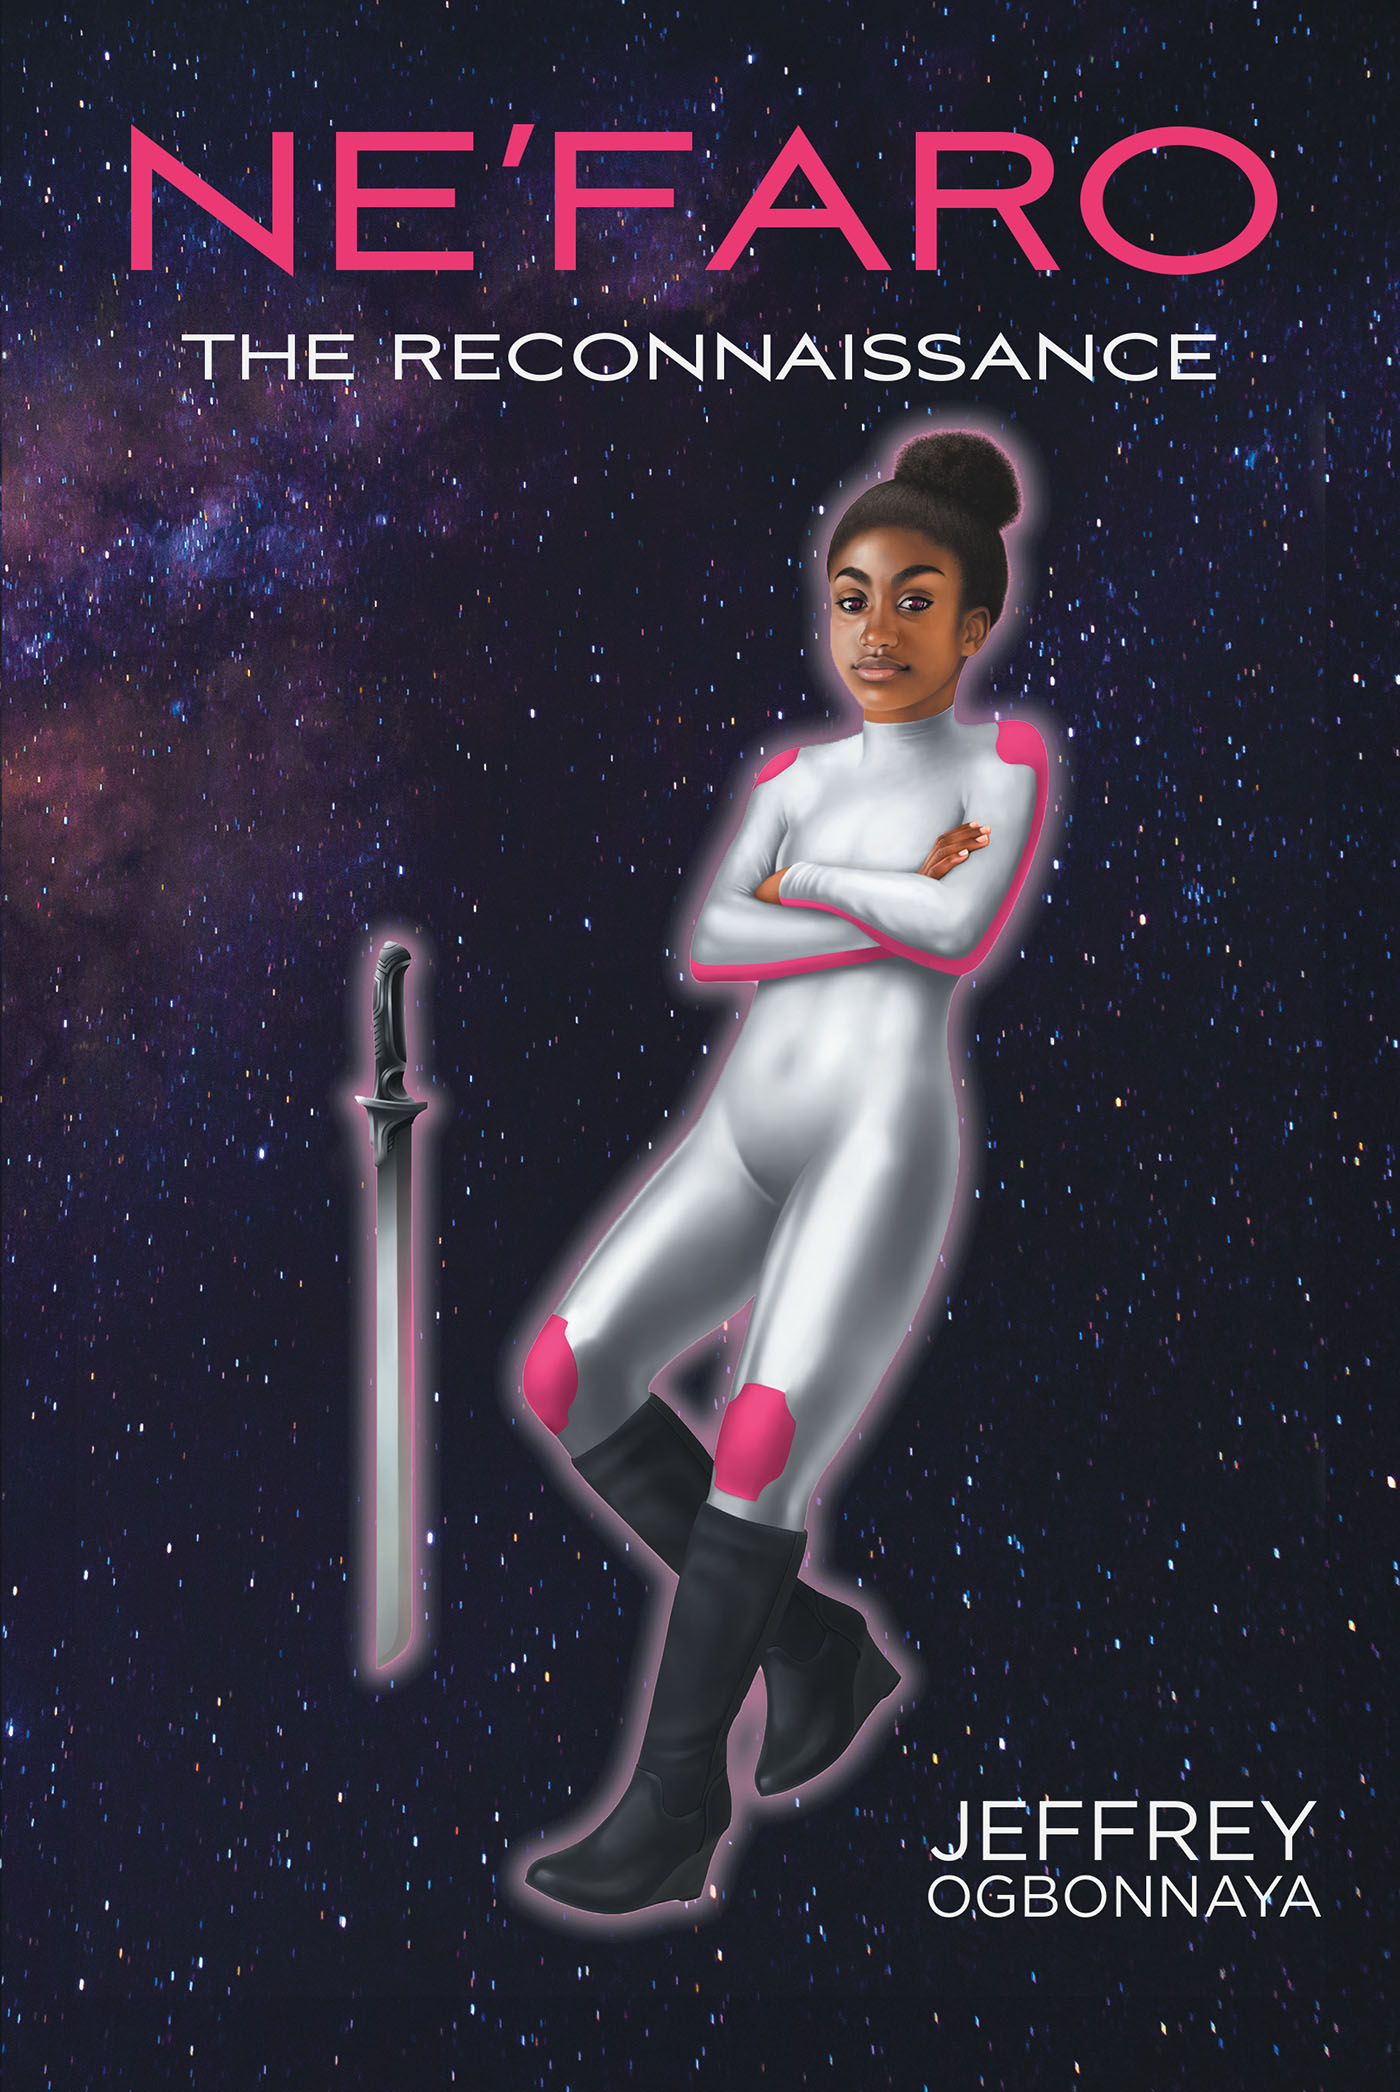 Author Jeffrey Ogbonnaya’s New Book, “Ne’faro: The Reconnaissance,” Follows the Fight of a Group of Superheroes Who Must Prepare for the Ultimate Battle to Save Earth